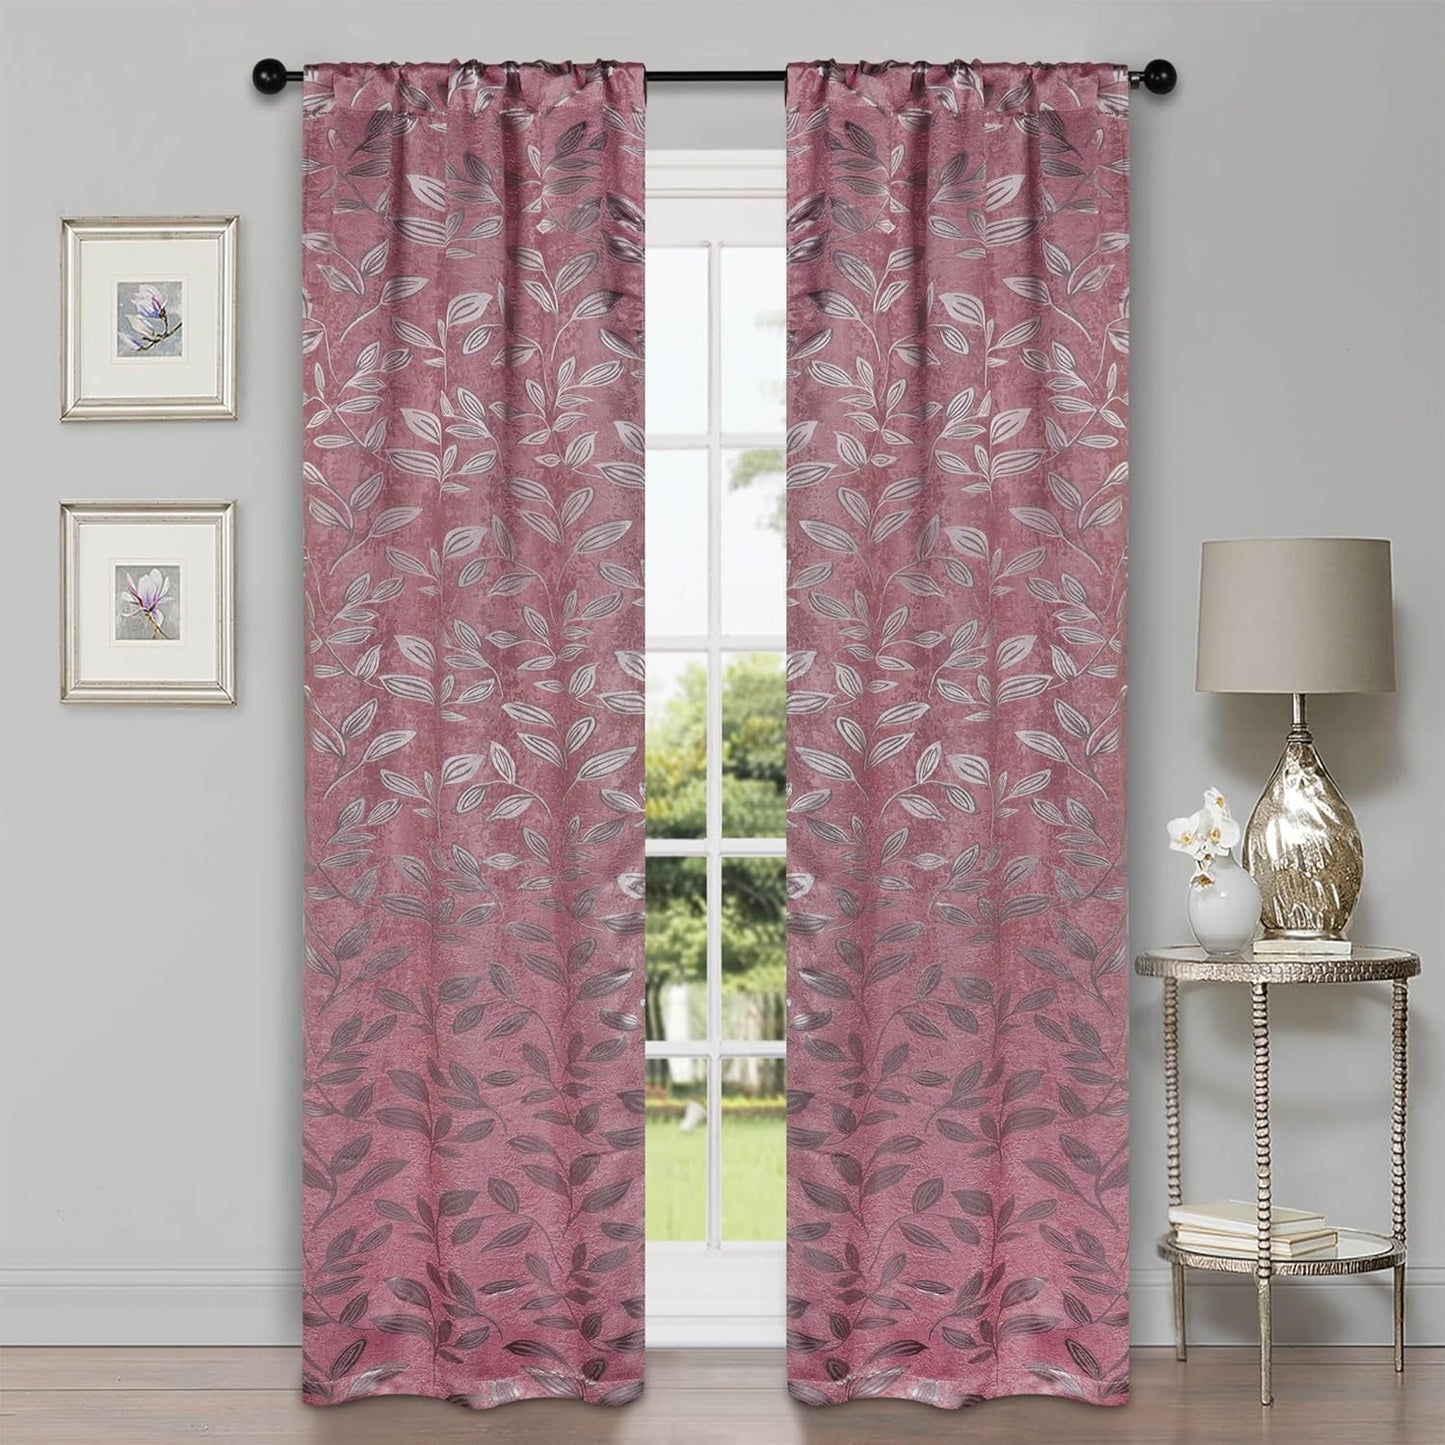 Superior Blackout Curtains, Room Darkening Window Accent for Bedroom, Sun Blocking, Thermal, Modern Bohemian Curtains, Leaves Collection, Set of 2 Panels, Rod Pocket - 52 in X 63 In, Nickel Black  Home City Inc. Blush 26 In X 84 In (W X L) 